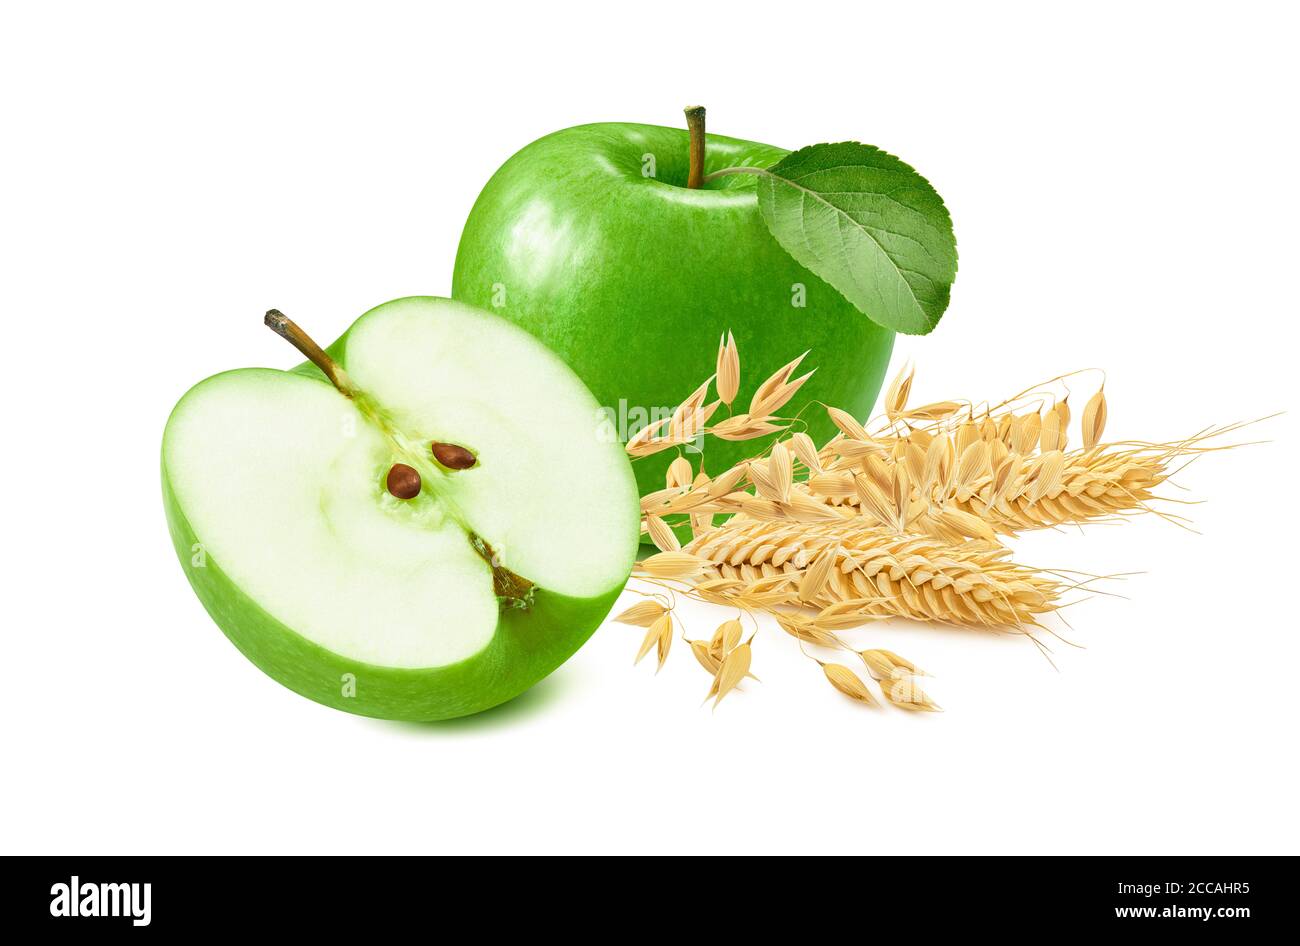 Green apple, wheat and oat ears isolated on white background. Package design element with clipping path. For oatmeal and cereals Stock Photo